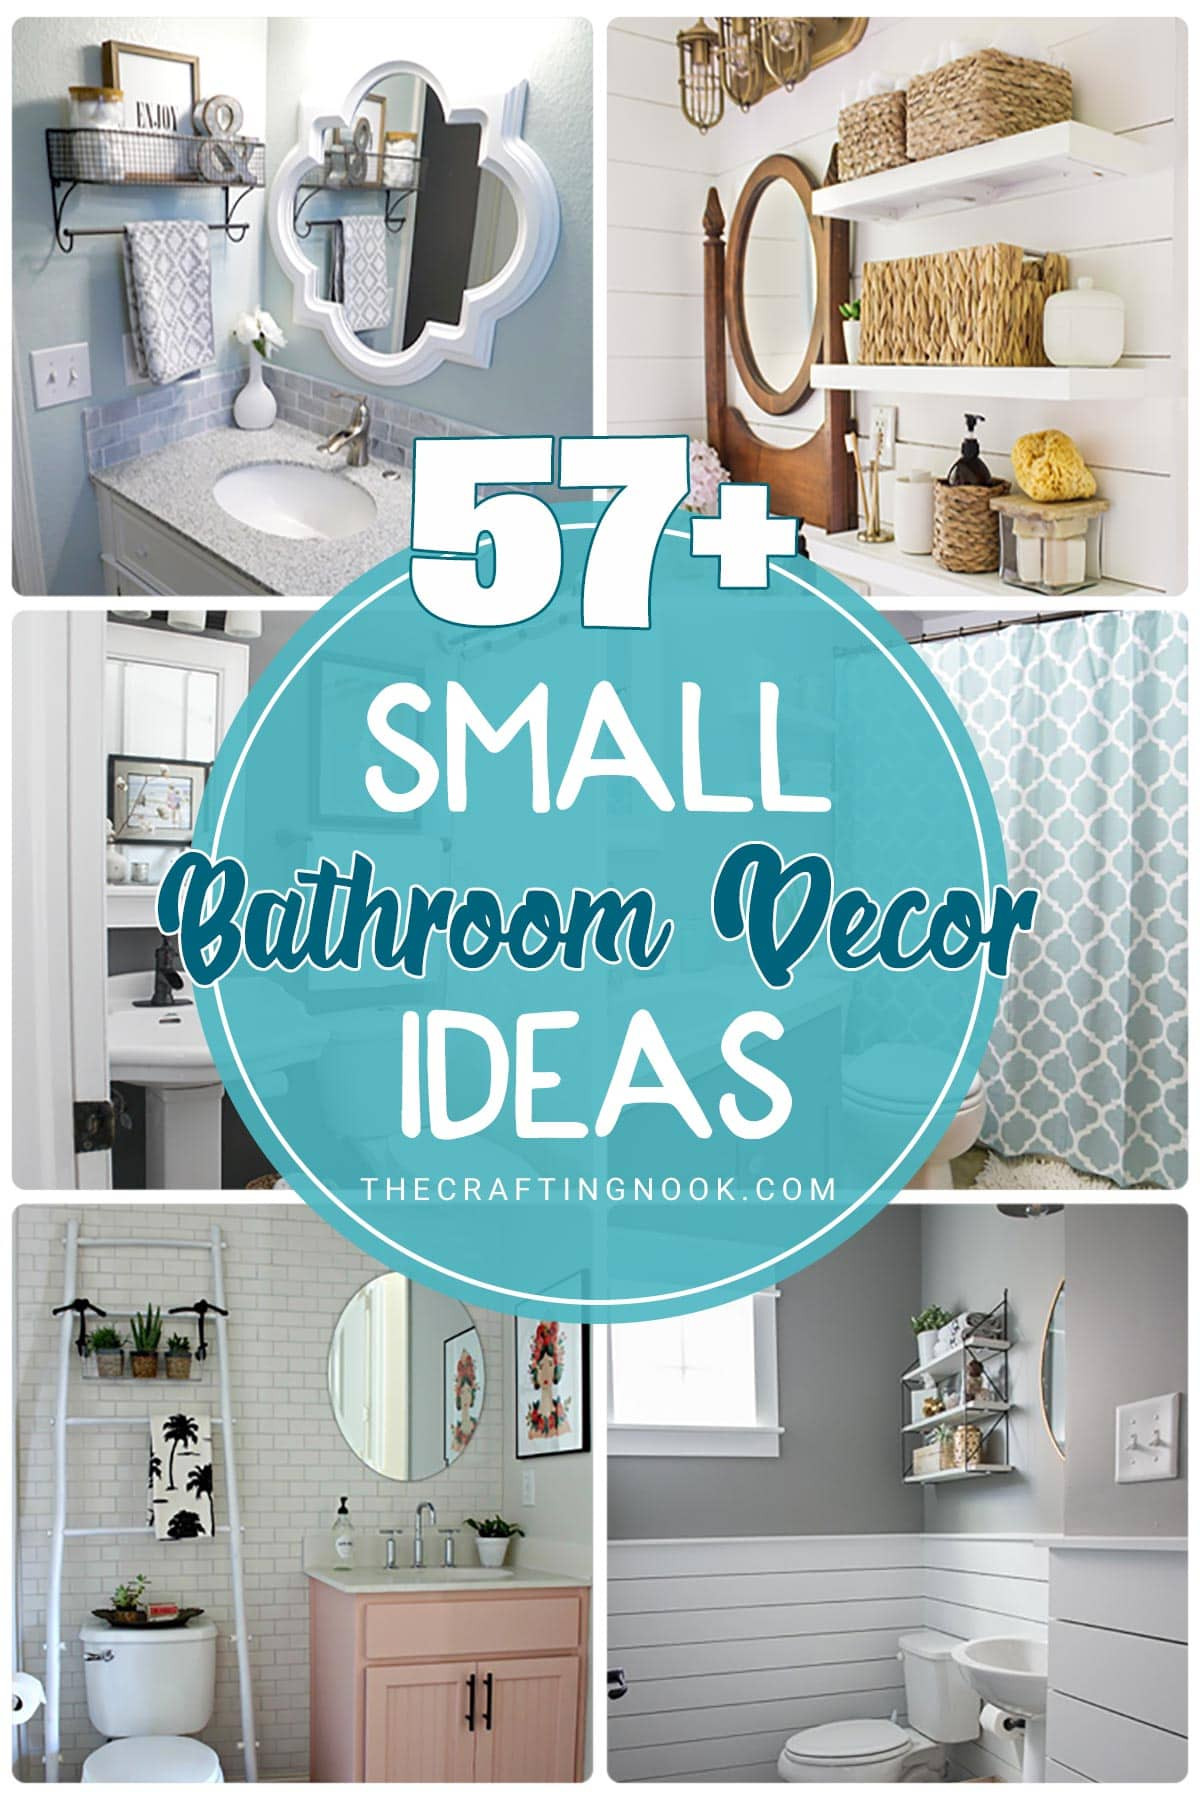 + Gorgeous Small Bathroom Decor Ideas - The Crafting Nook